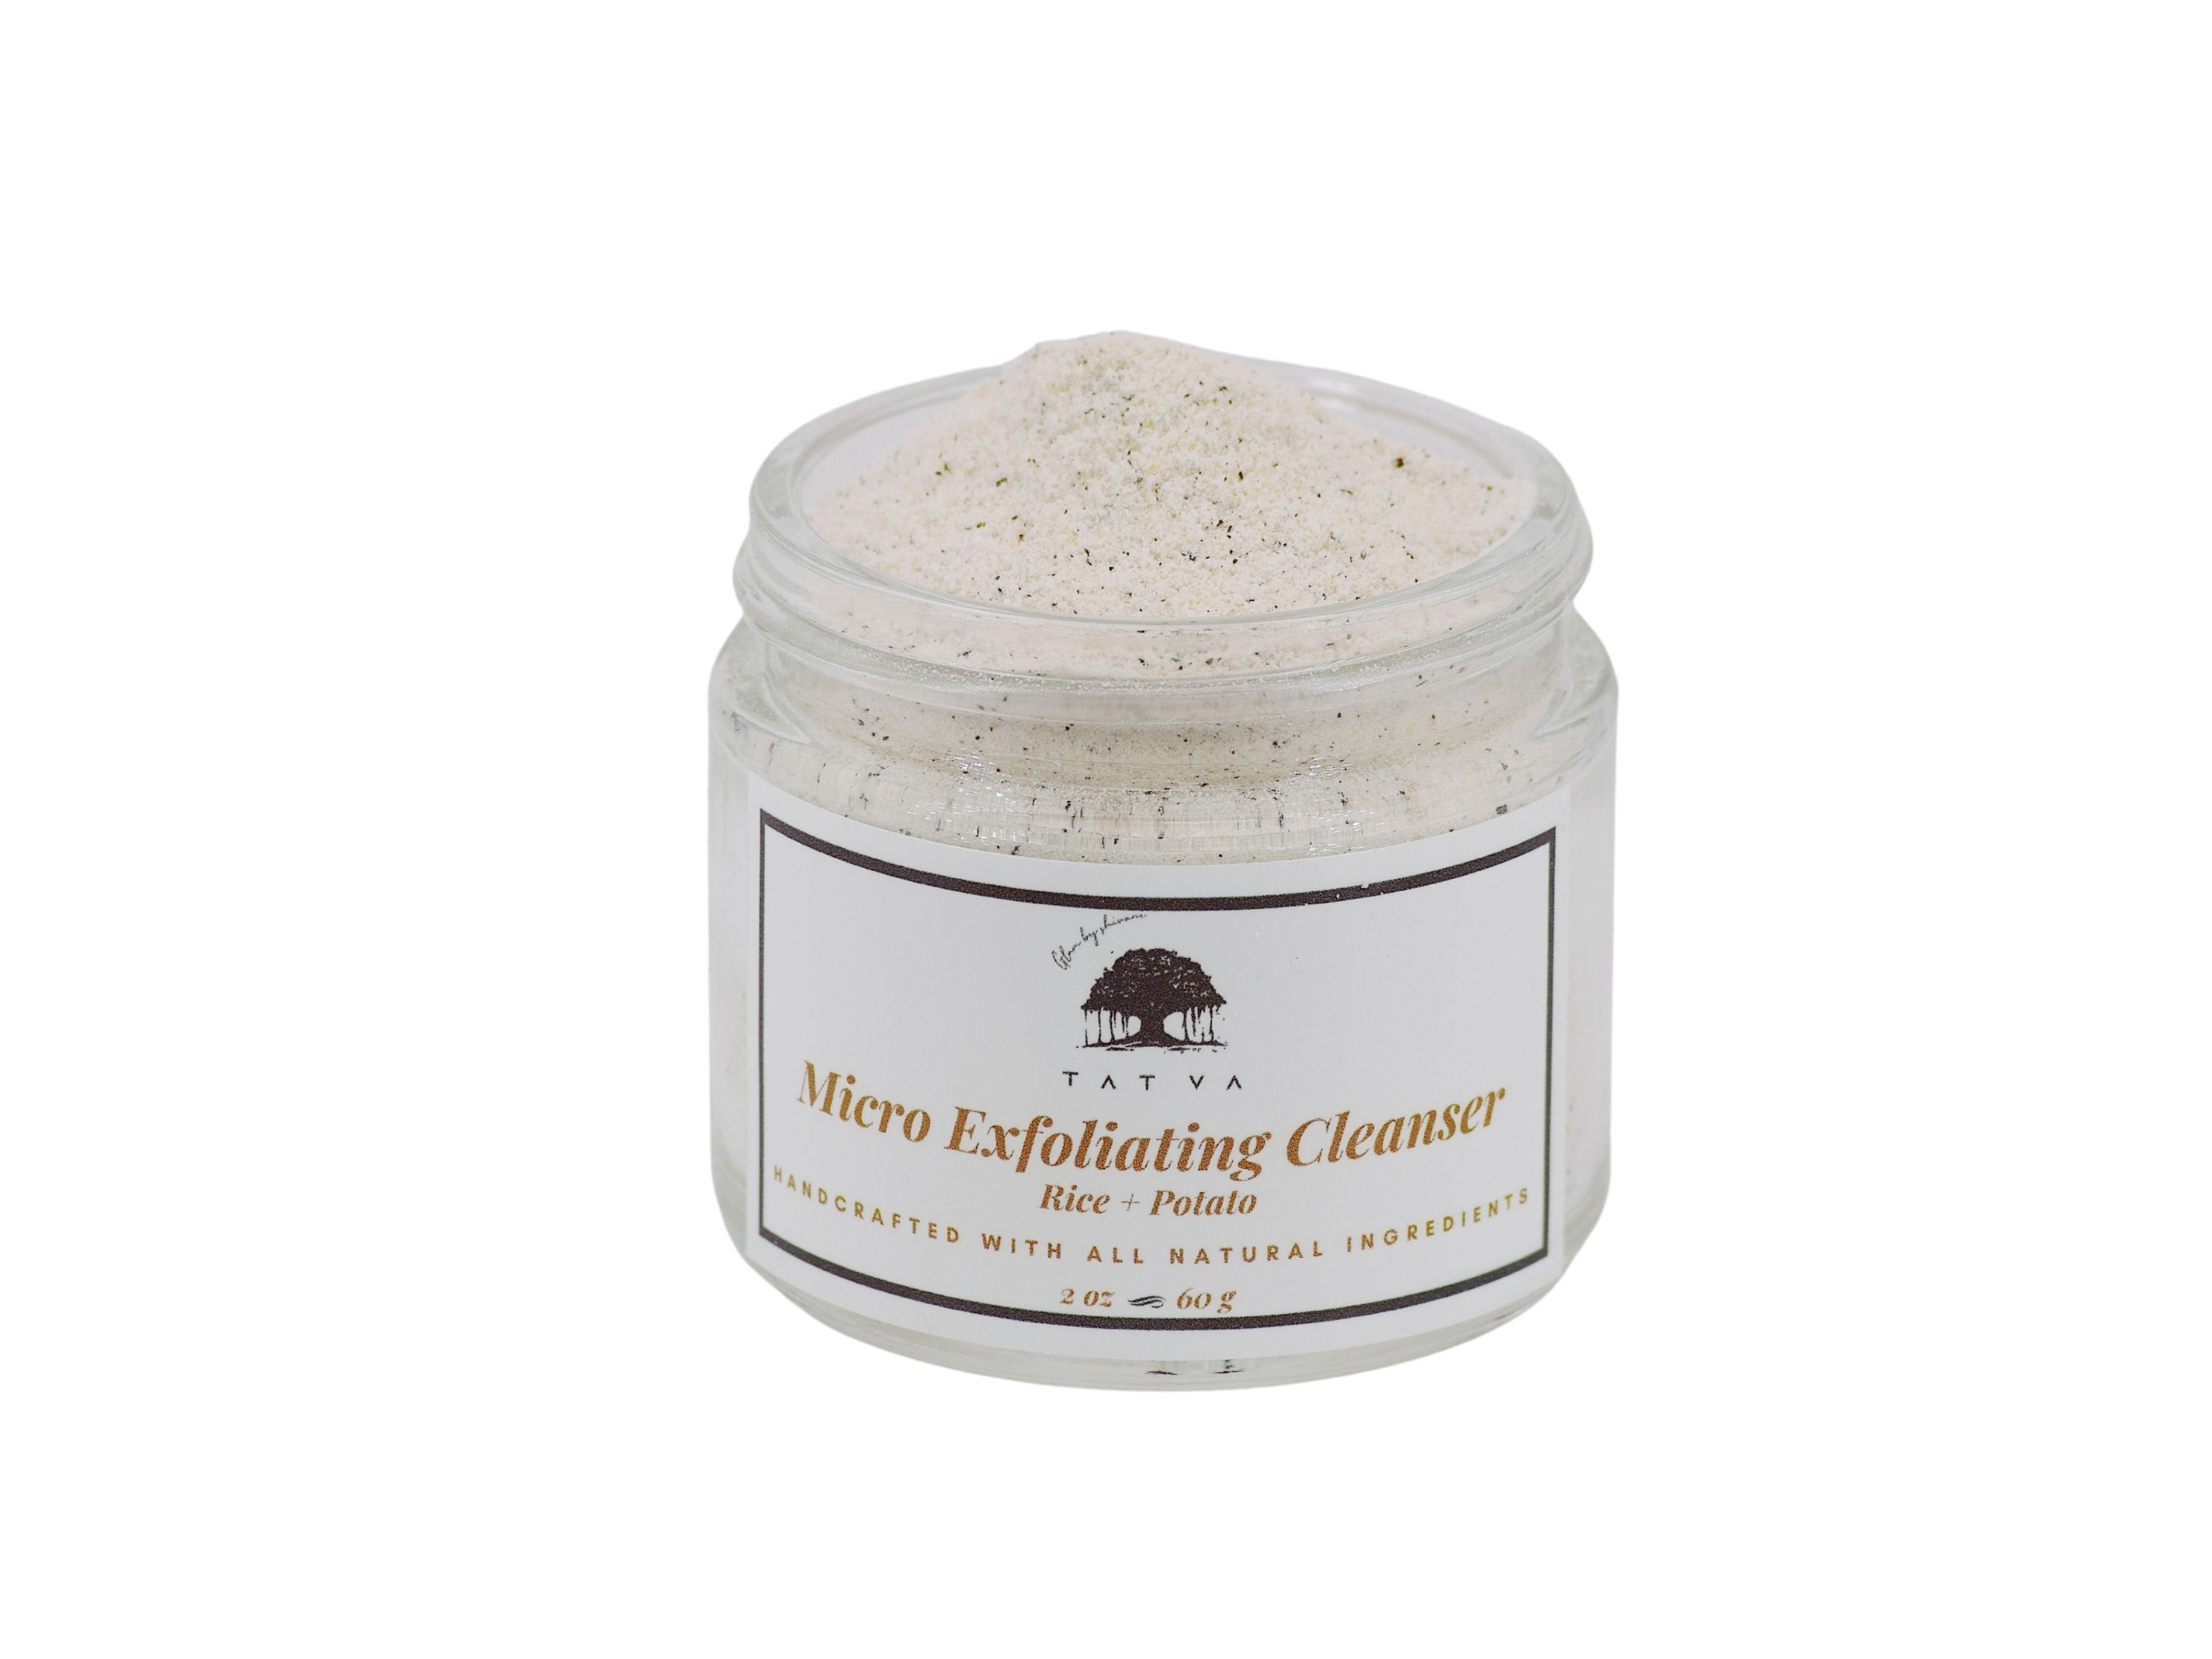 Micro exfoliating Cleanser, Daily Natural Cleansing Grains